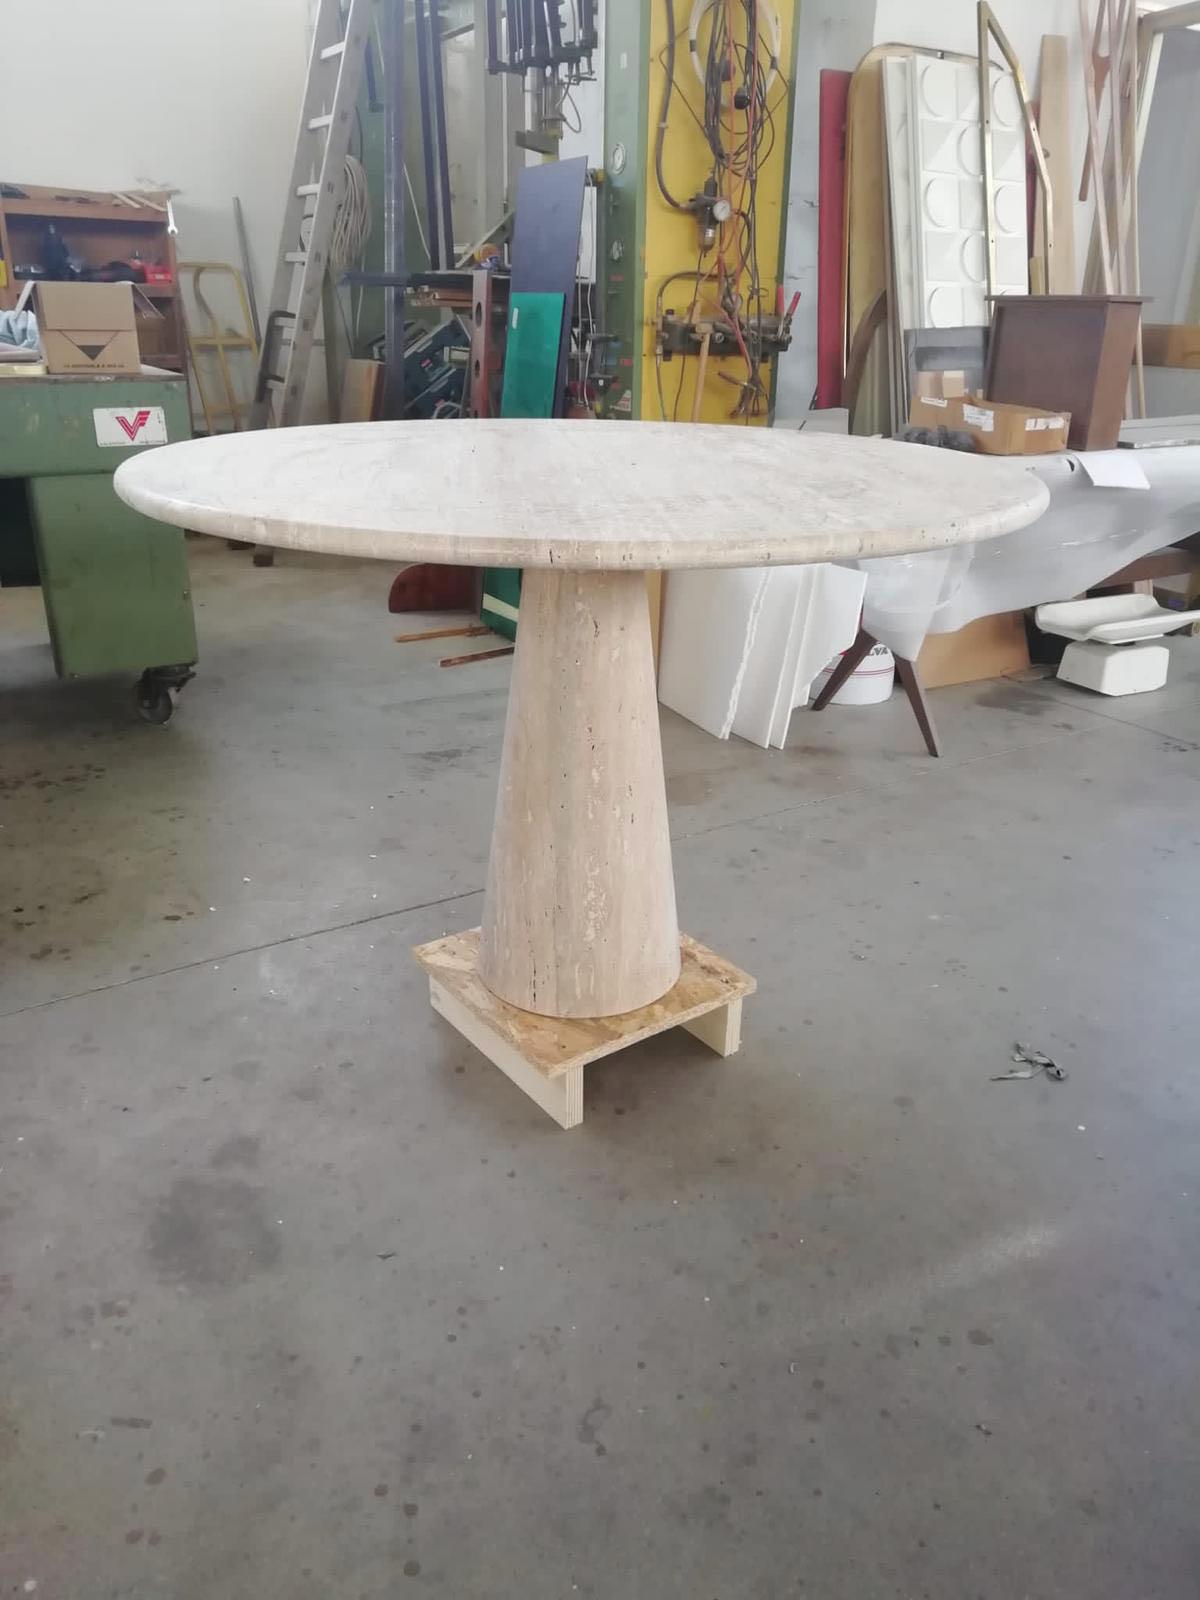 50% deposit listing for a travertine dining table

Remaining 50% to be paid on completion

Finish to be as shown in photos supplied by customer

Made to order in Italy

Round top

Customised dimensions 

Honed or polished finish

Rounded or straight